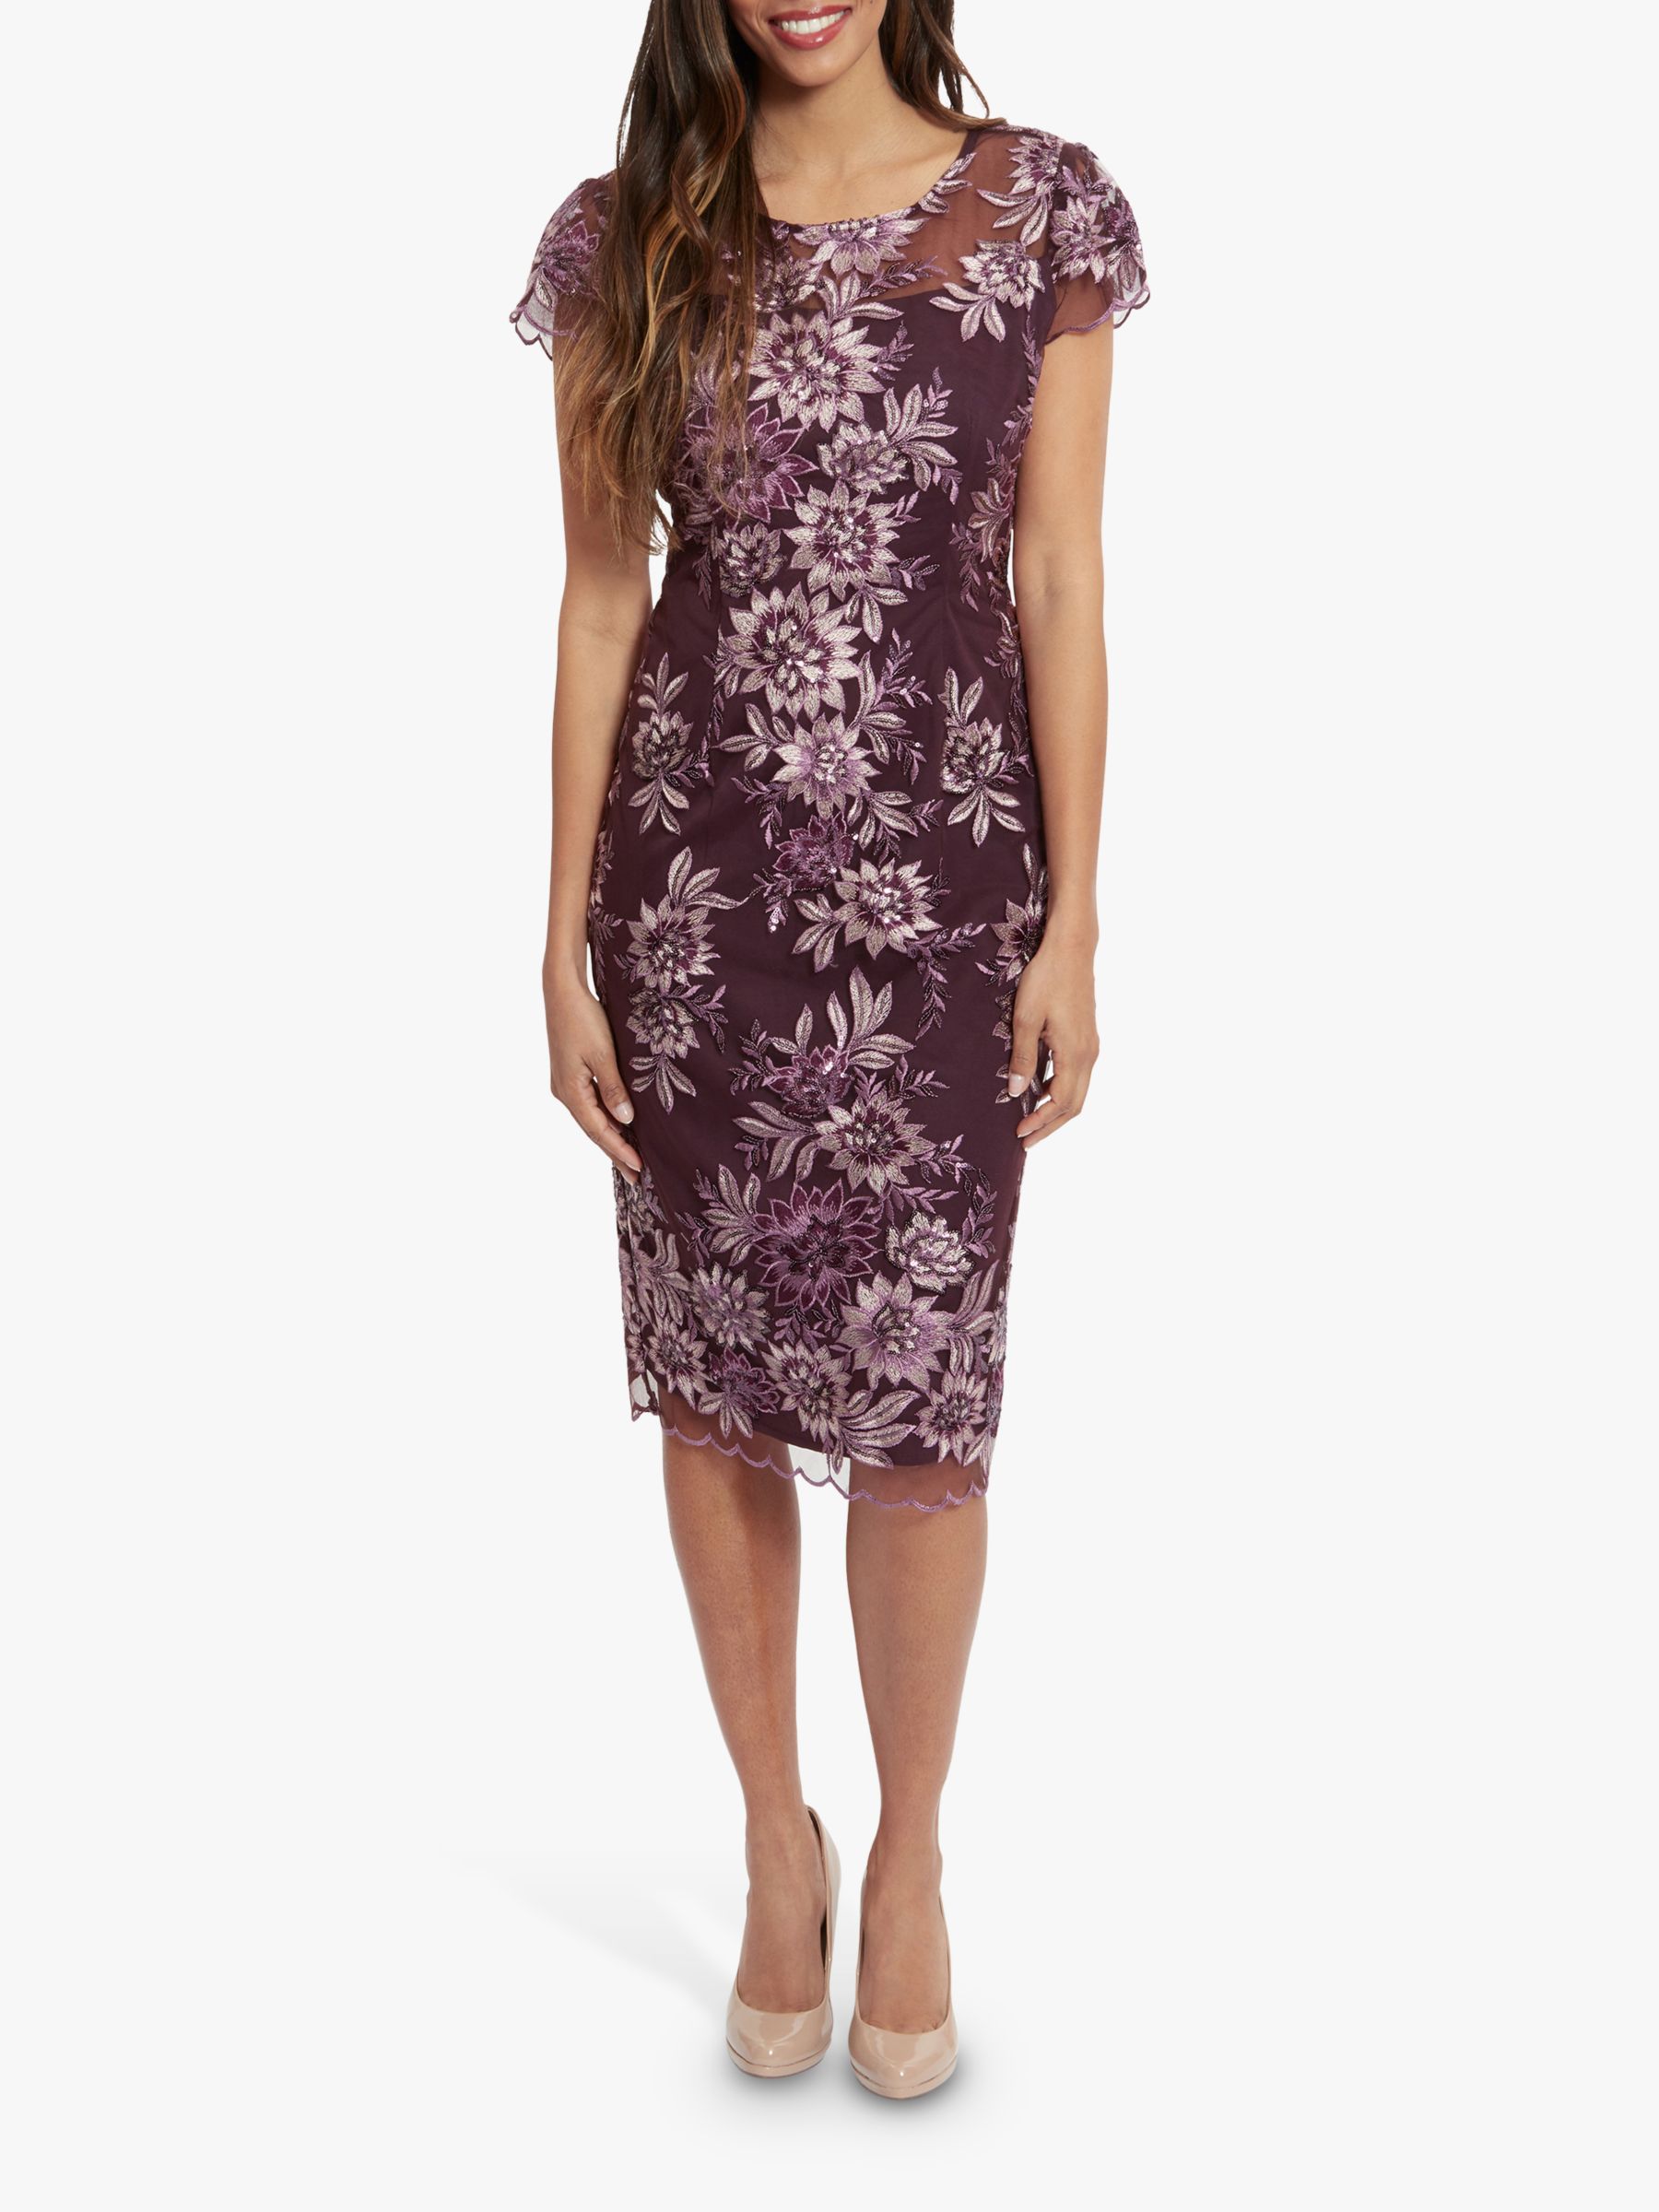 Gina Bacconi Arianna Floral Embroidered Dress, Plum at John Lewis & Partners